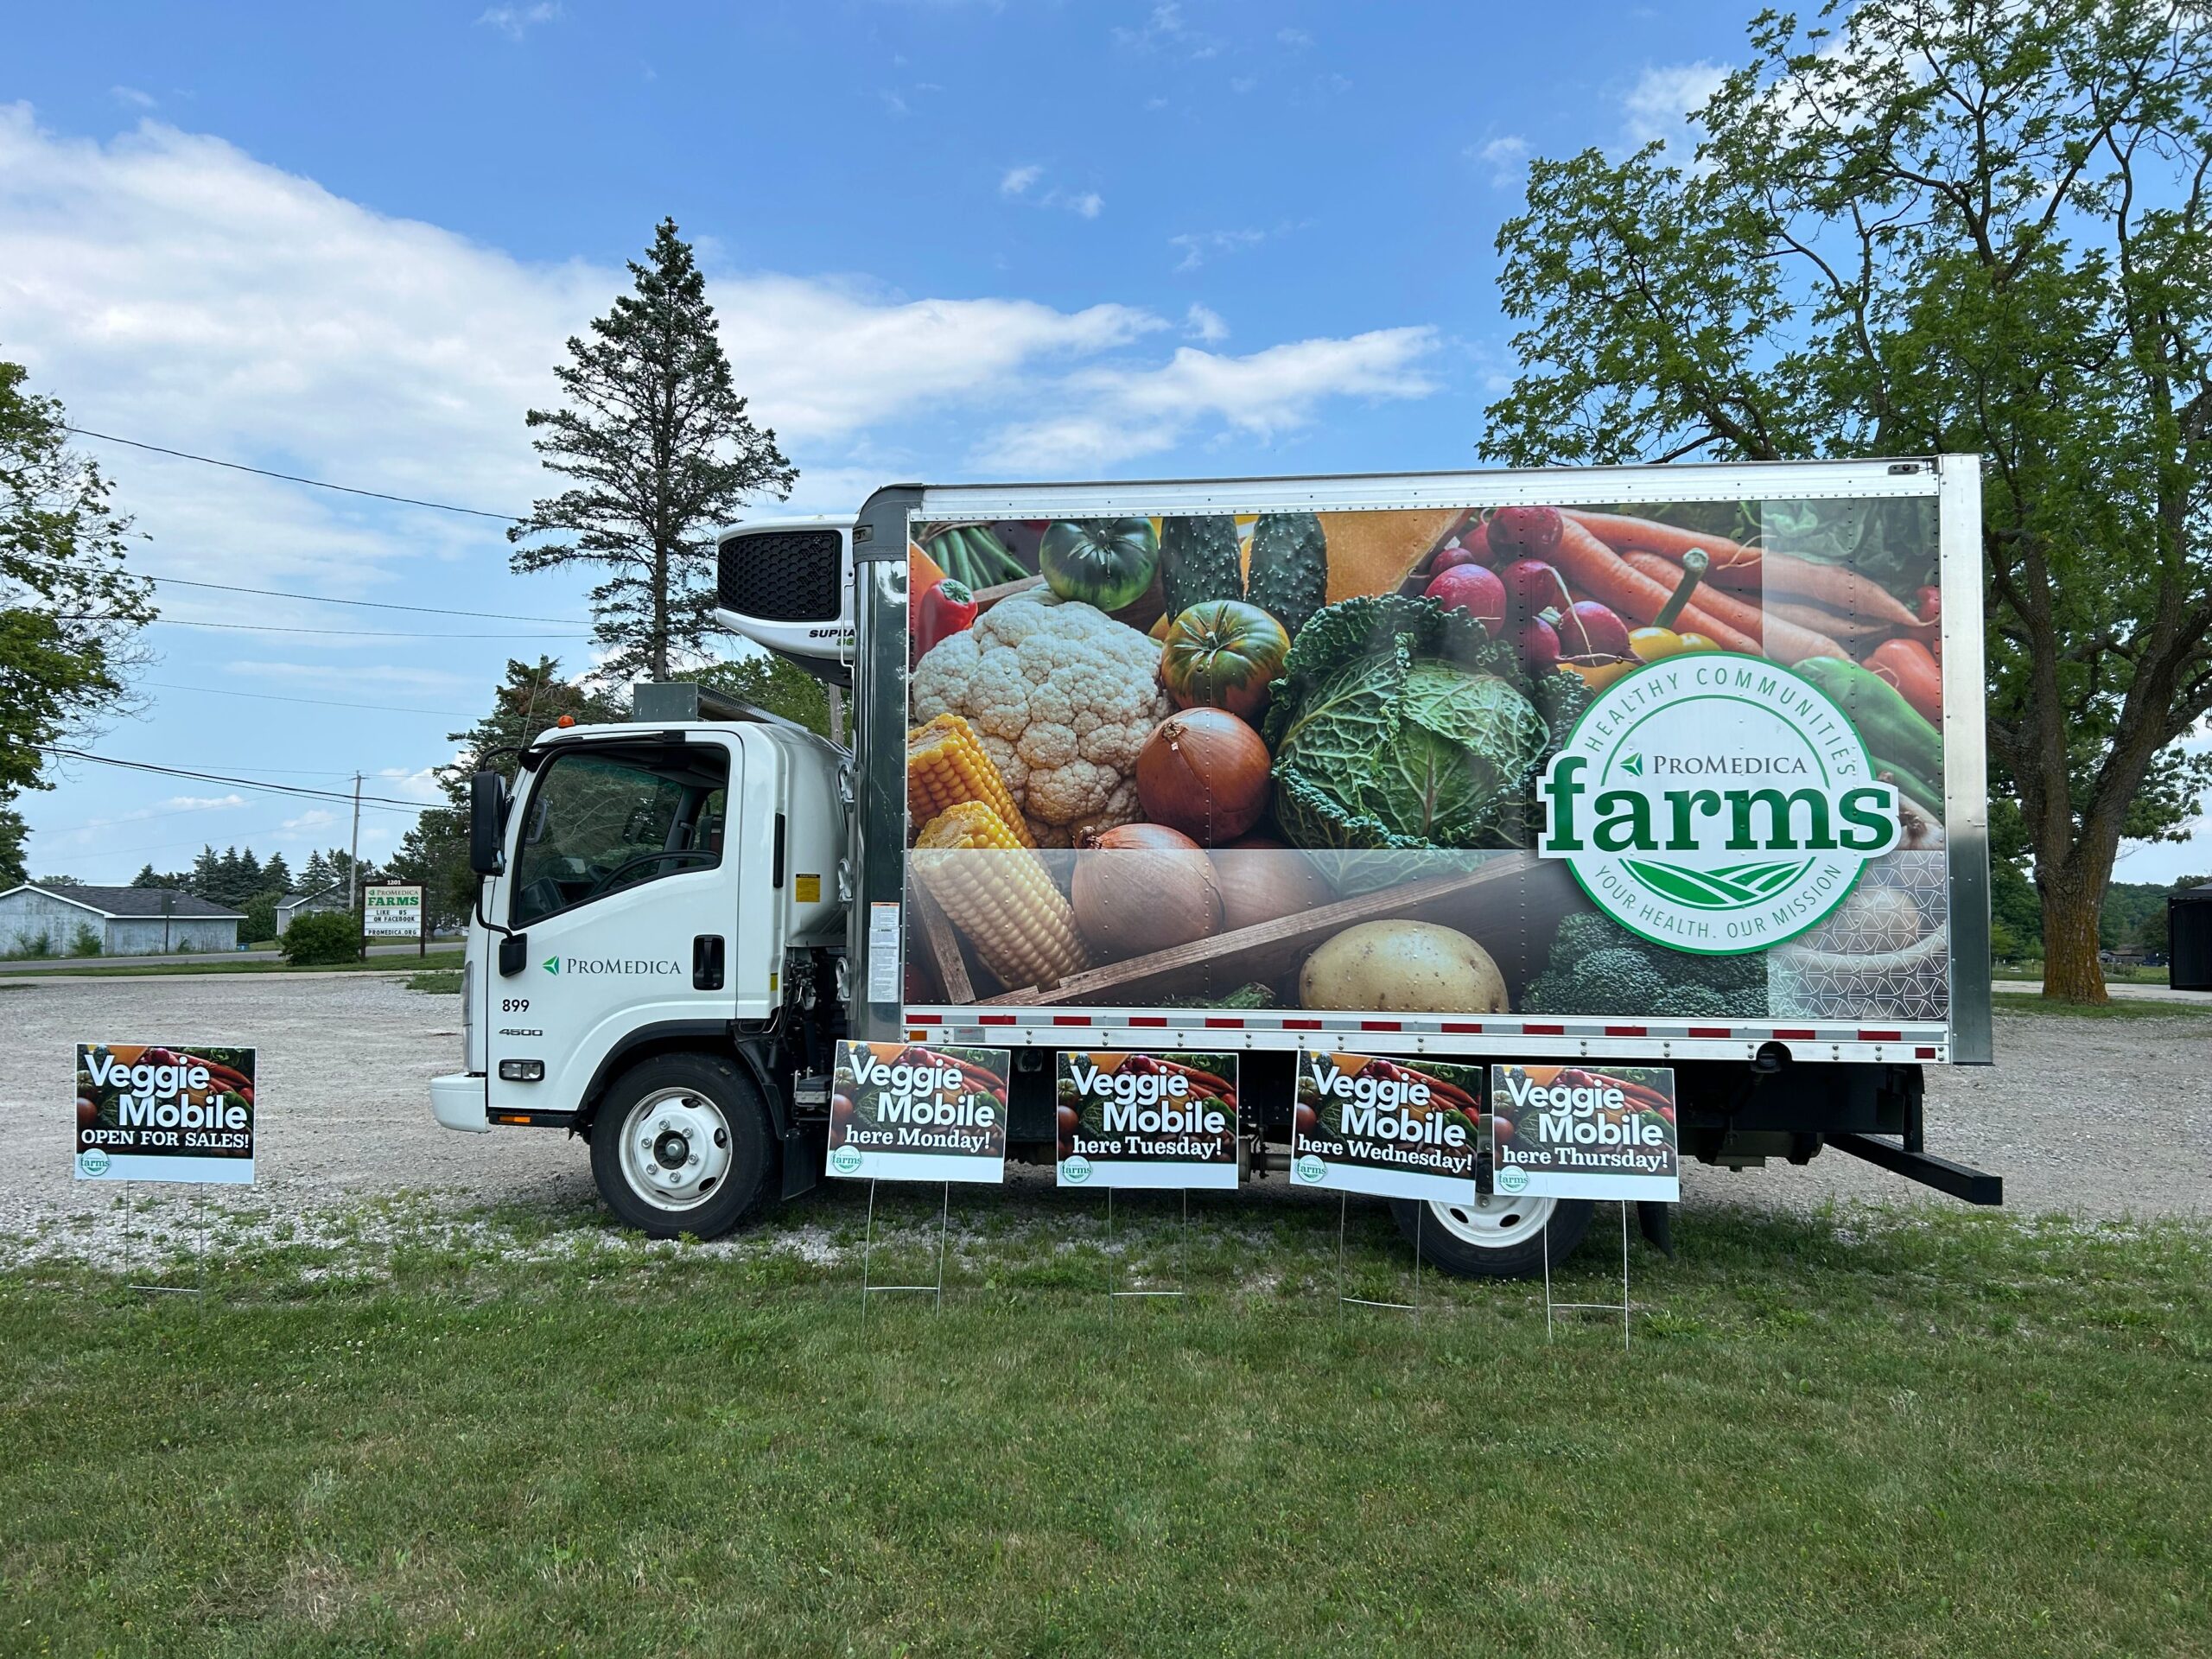 Promedica Charles And Virginia Hickman Hospital’s Farms And Veggie Mobile